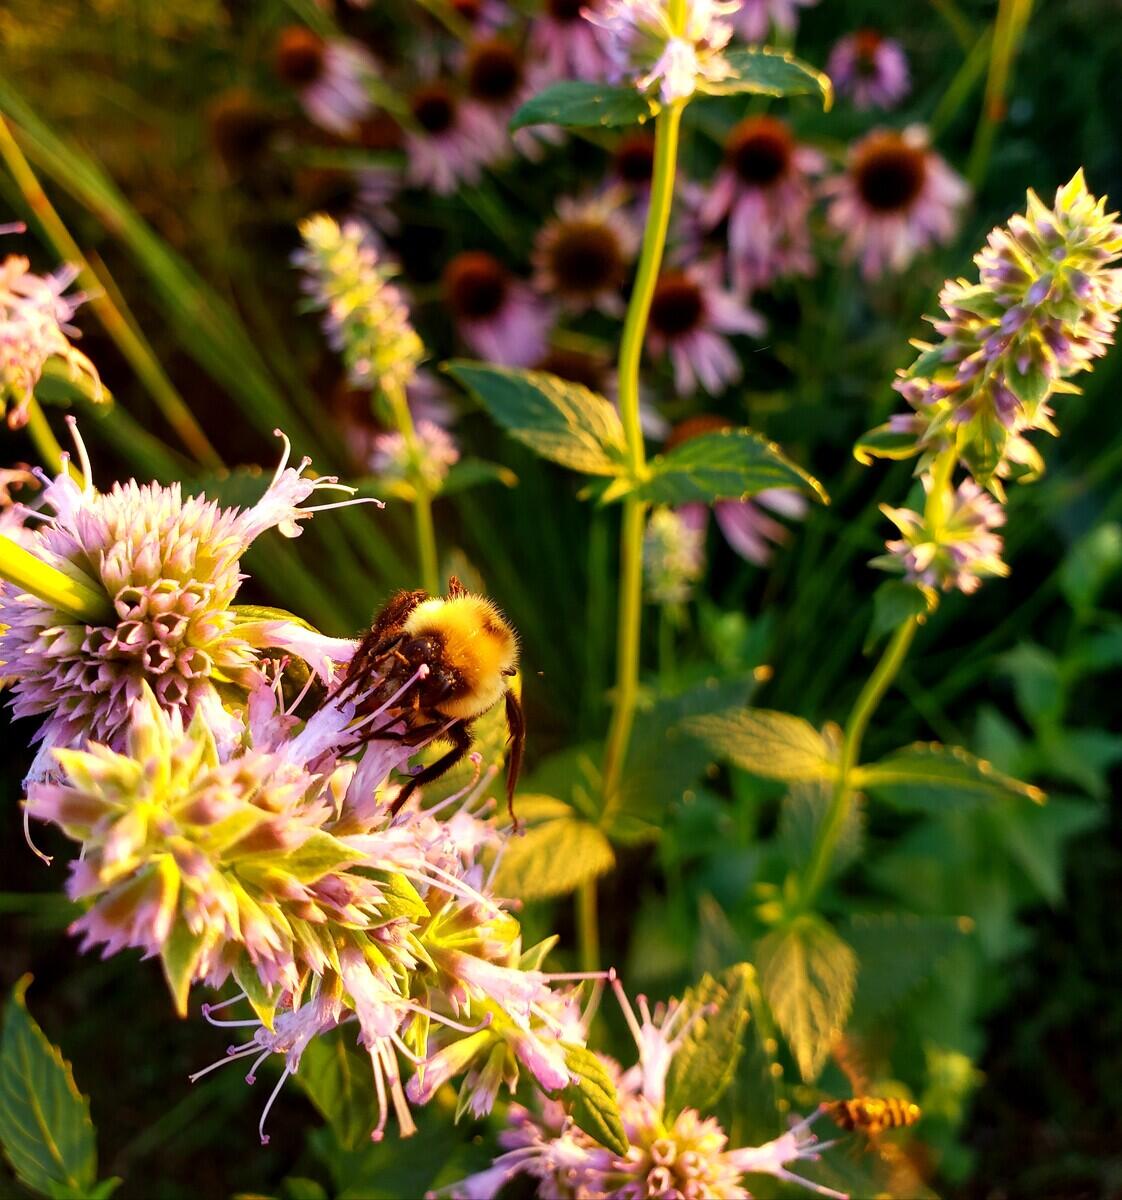 Bumblebee at sunset on some Anise Hyssop by Kristen Campisi